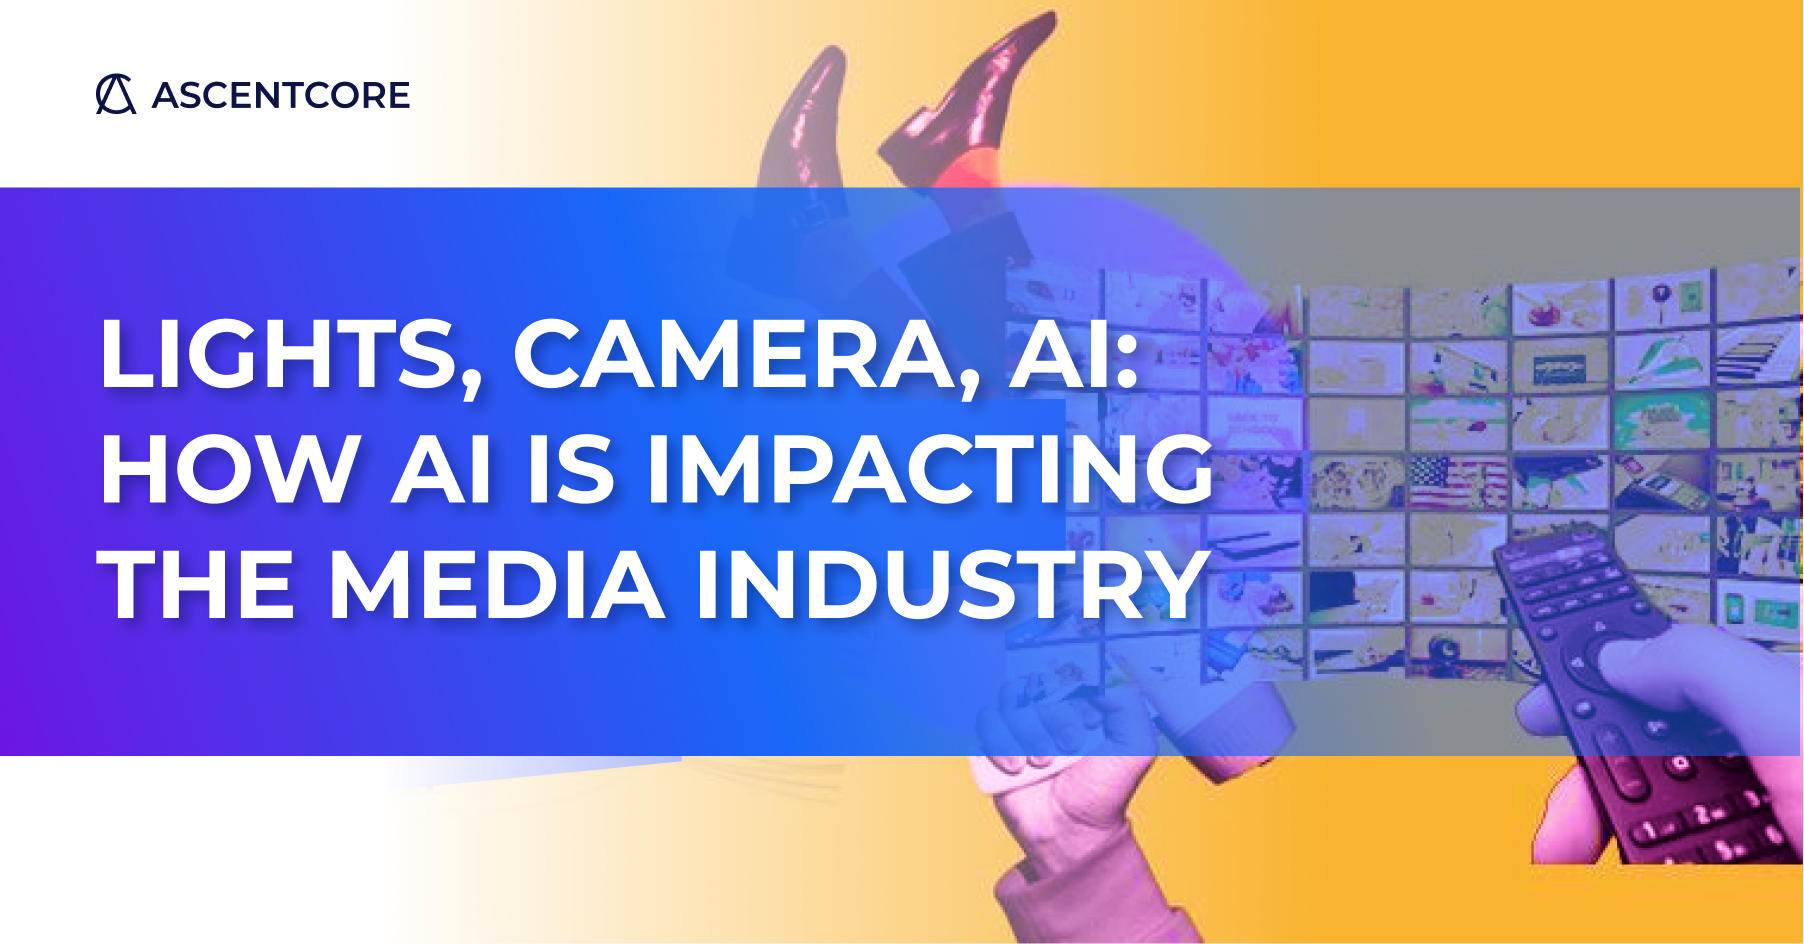 ascentcore-how-ai-is-impacting-the-media-industry-blogpost.